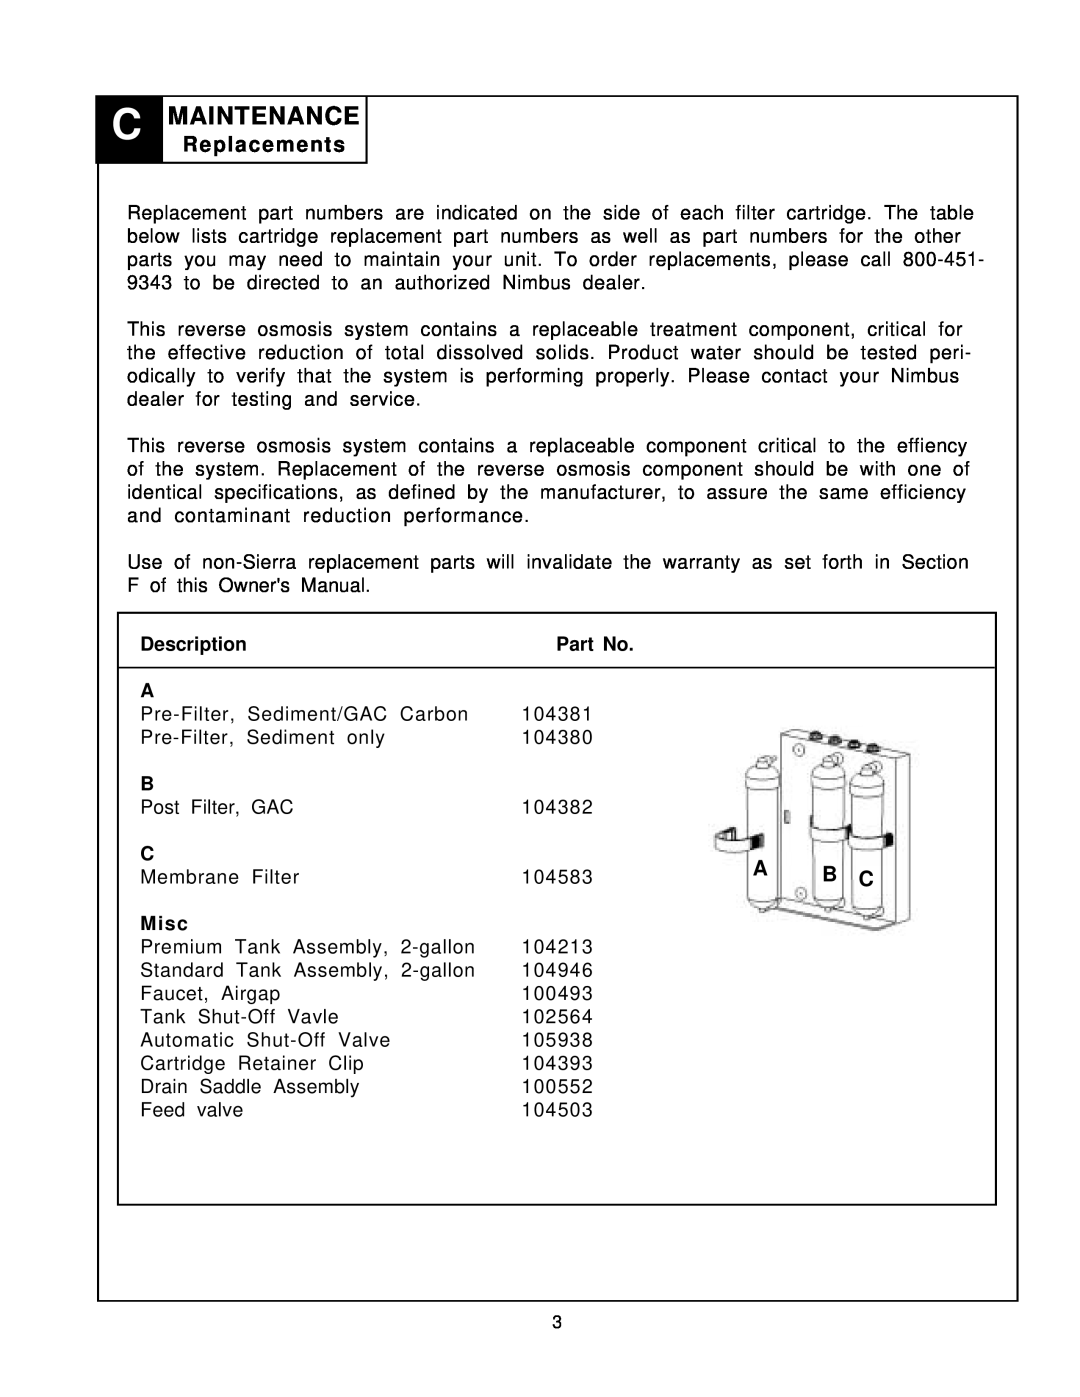 Sierra SIERRA REVERSE OSMOSIS DRINKING WATER SYSTEM, PN103257 owner manual Maintenance, Replacements, Description, Misc 